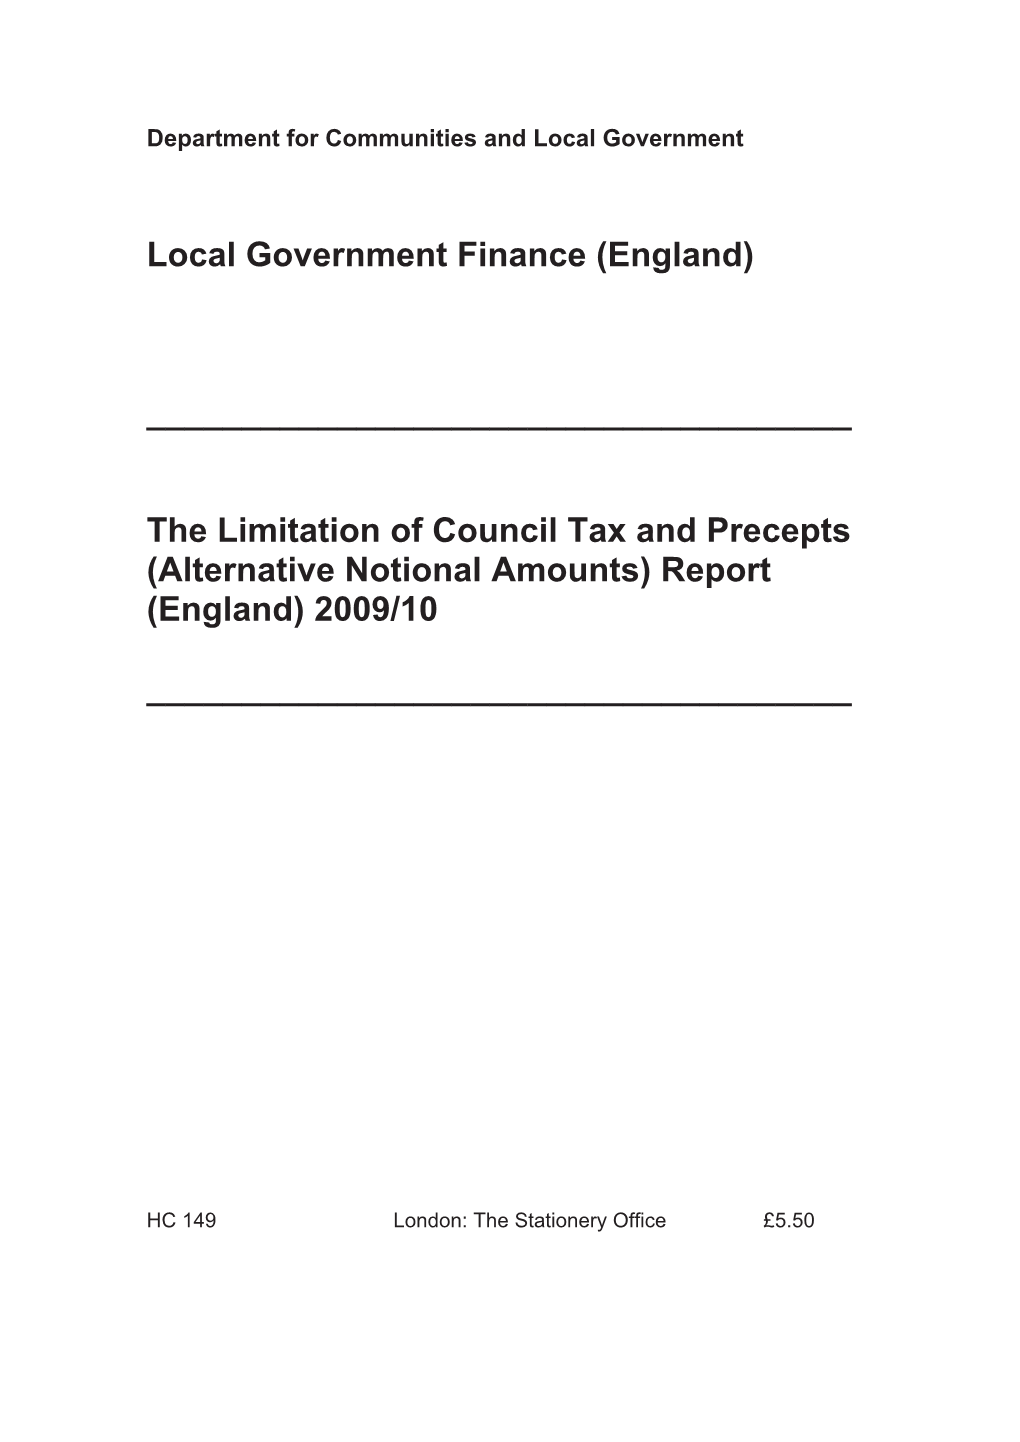 The Limitation of Council Tax and Precepts (Alternative Notional Amounts) Report (England) 2009/10